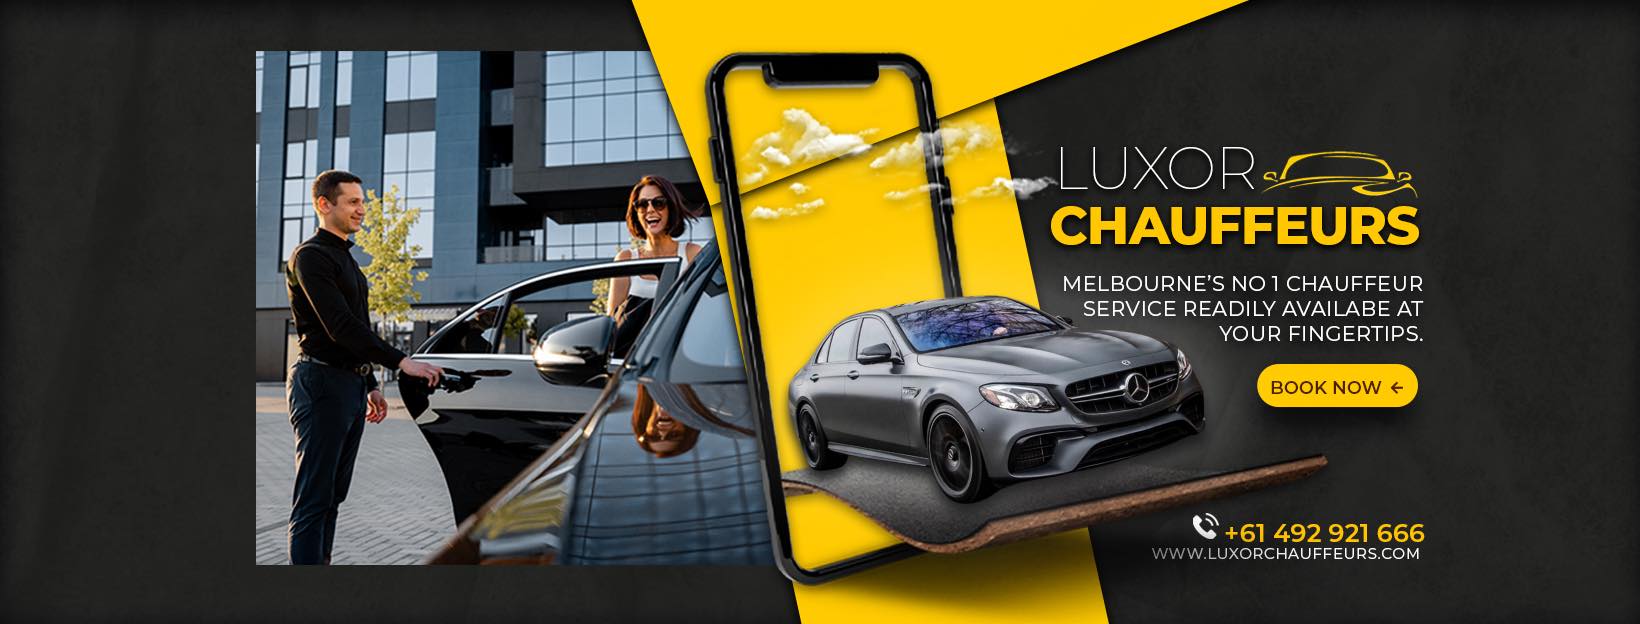 Professional Chauffeurs In Melbourne